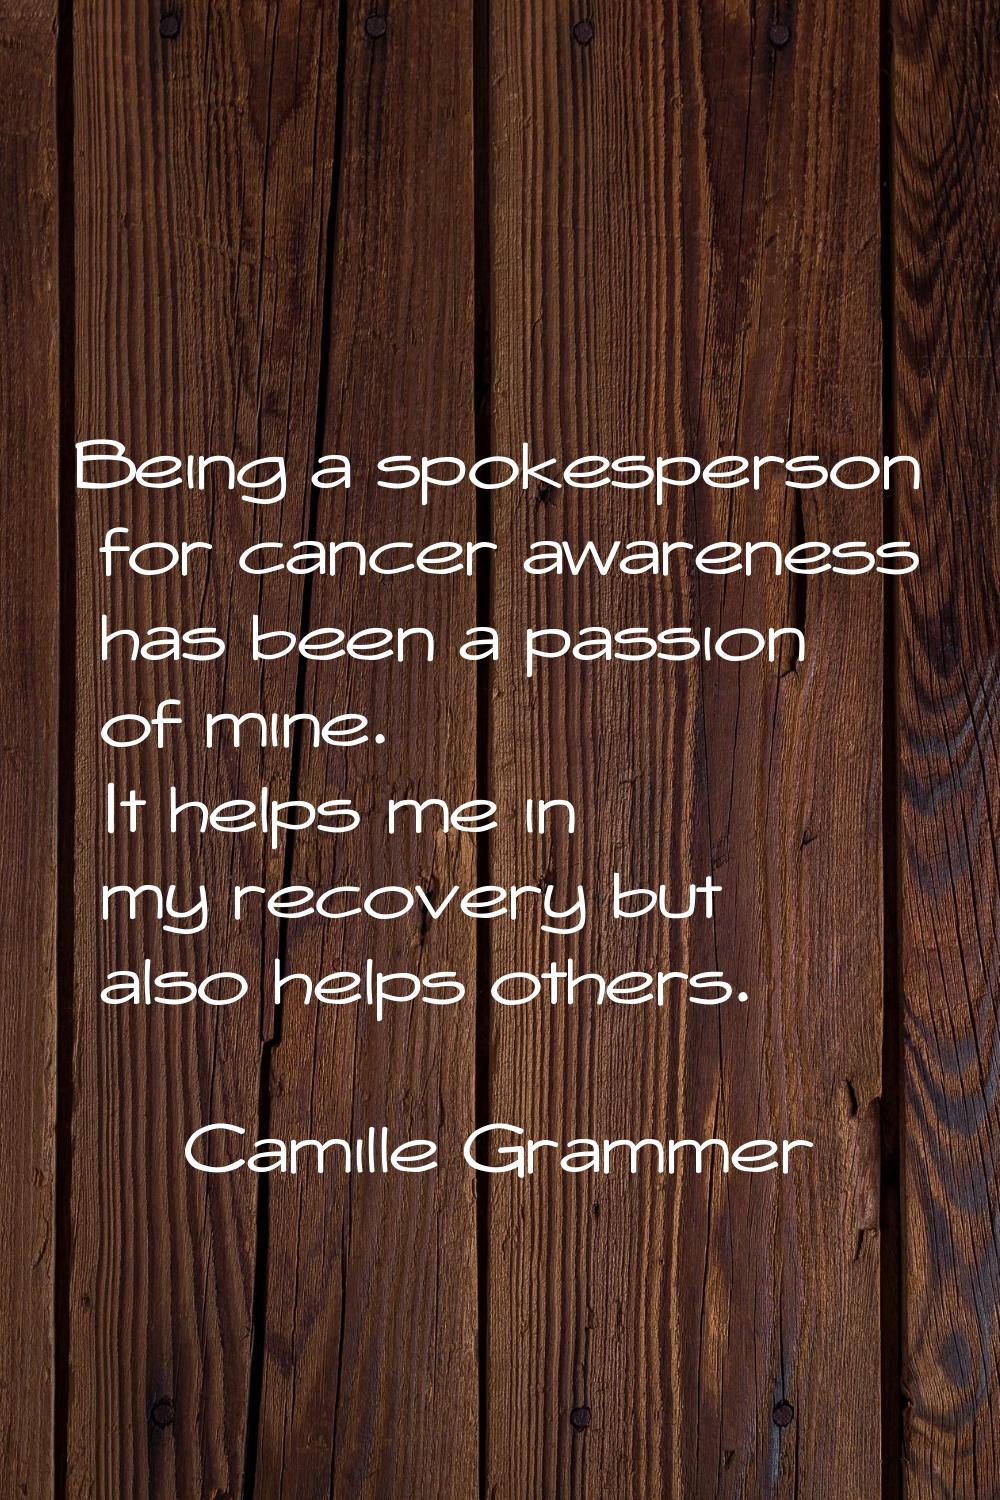 Being a spokesperson for cancer awareness has been a passion of mine. It helps me in my recovery bu